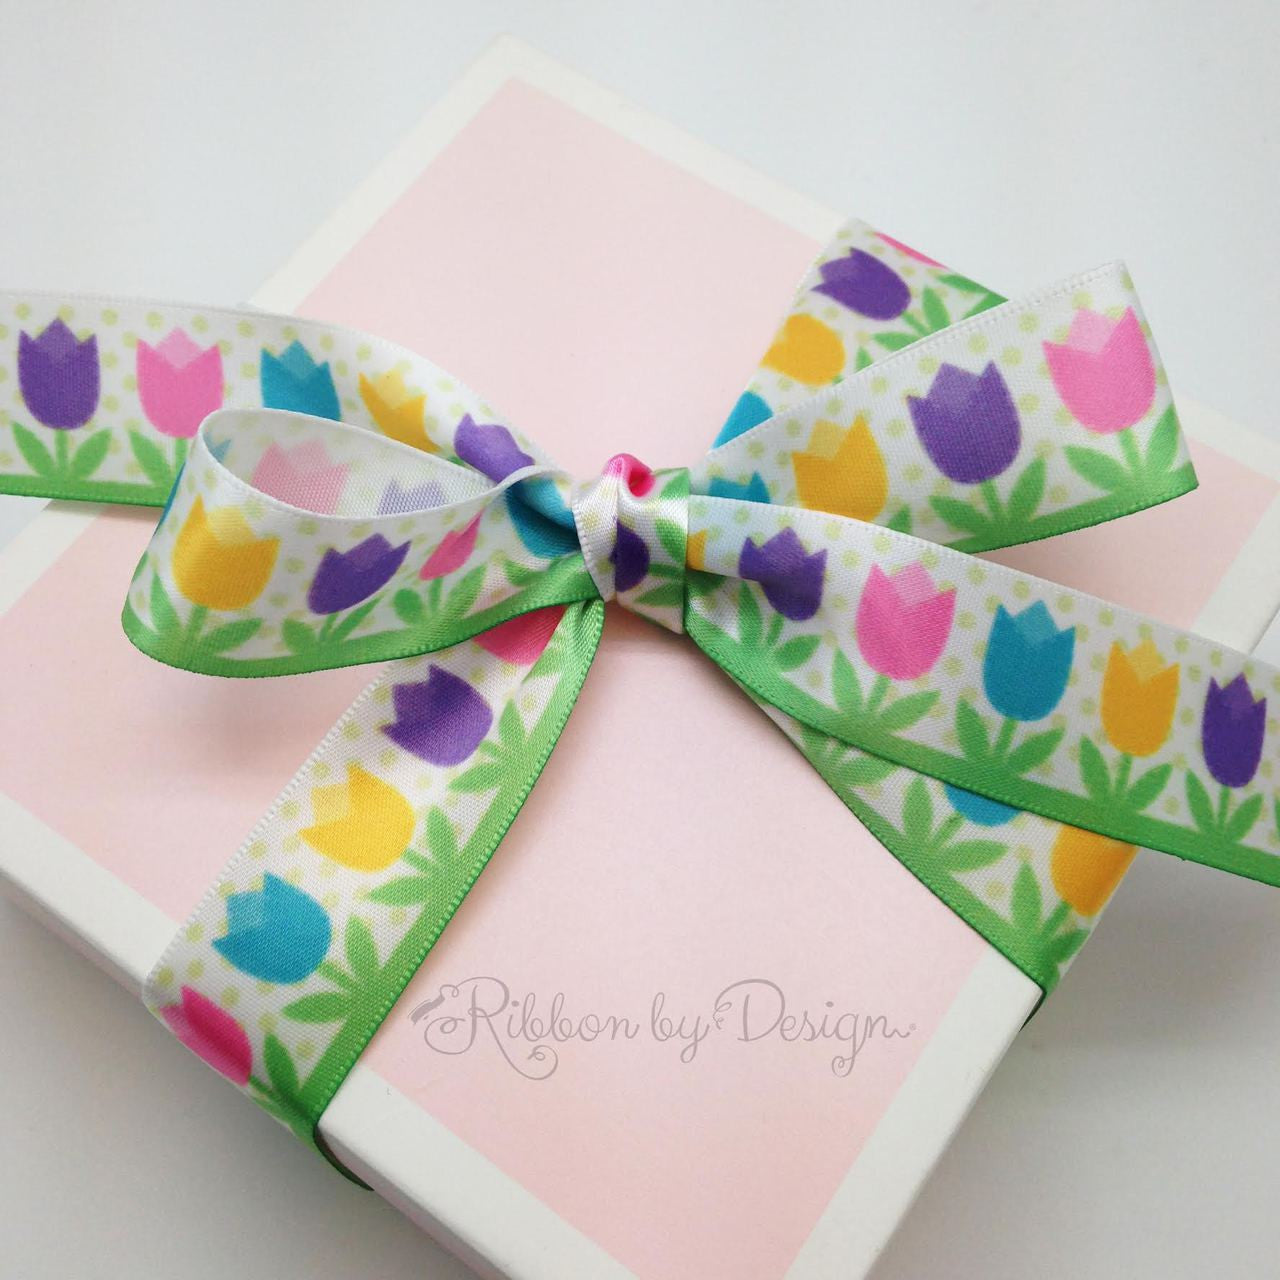 There is nothing like a sweet gift box to welcome Spring!